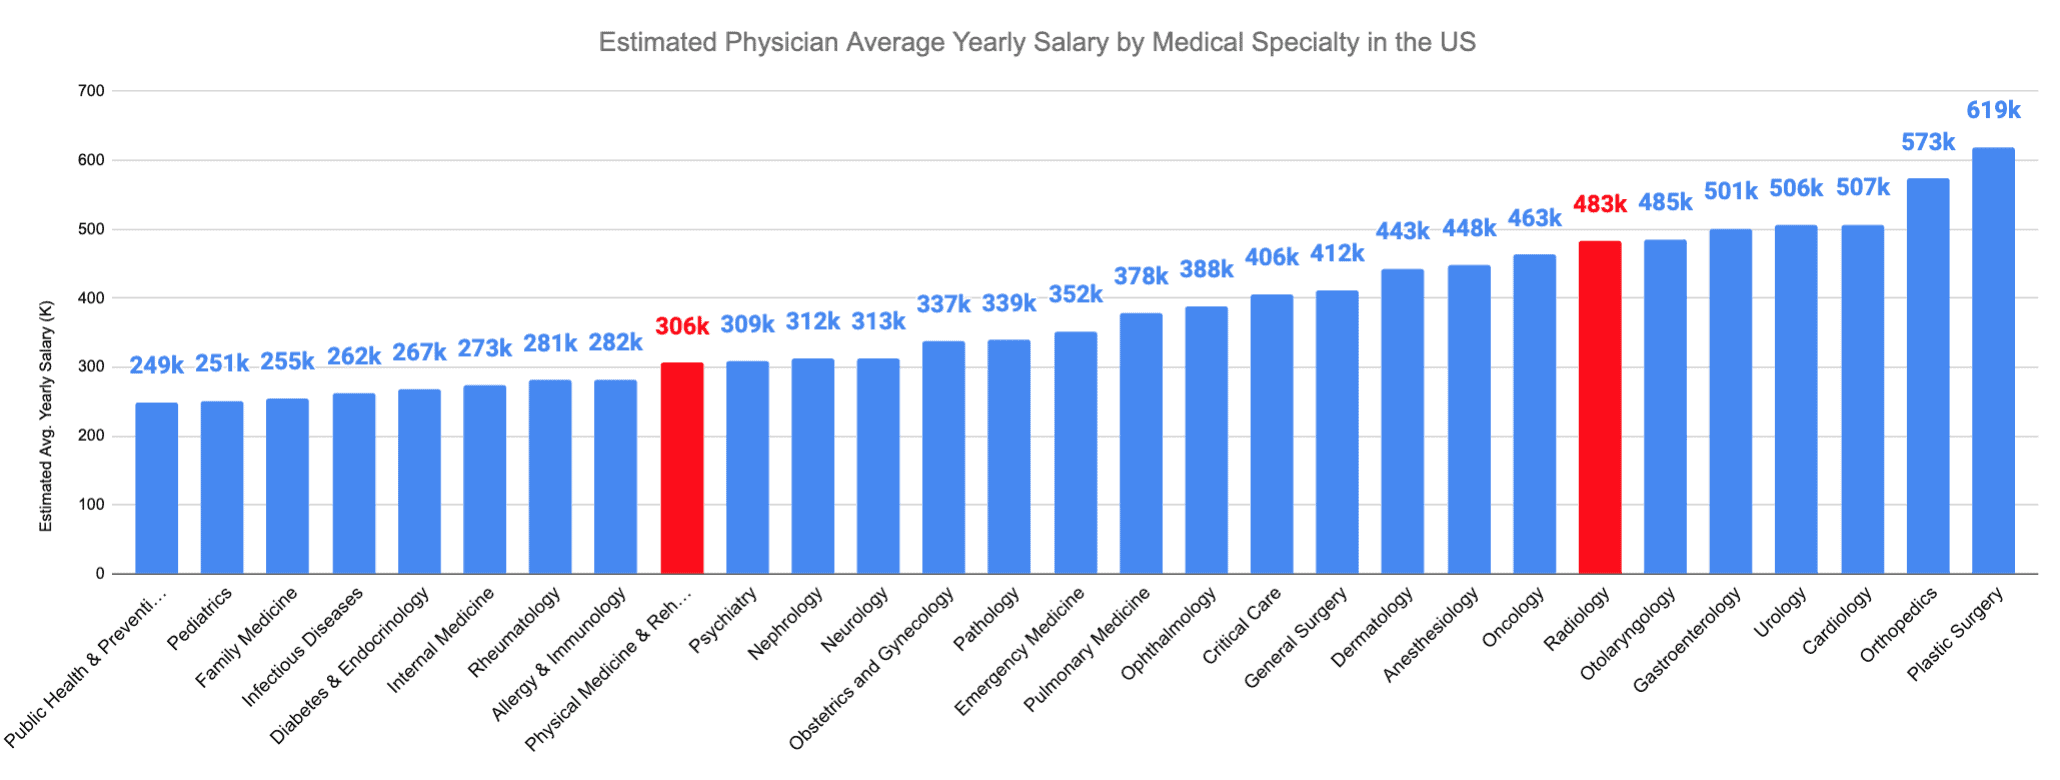 Radiology vs. Physical Medicine &amp; Rehabilitation Estimated Physician Average Yearly Salary by Medical Specialty in the US